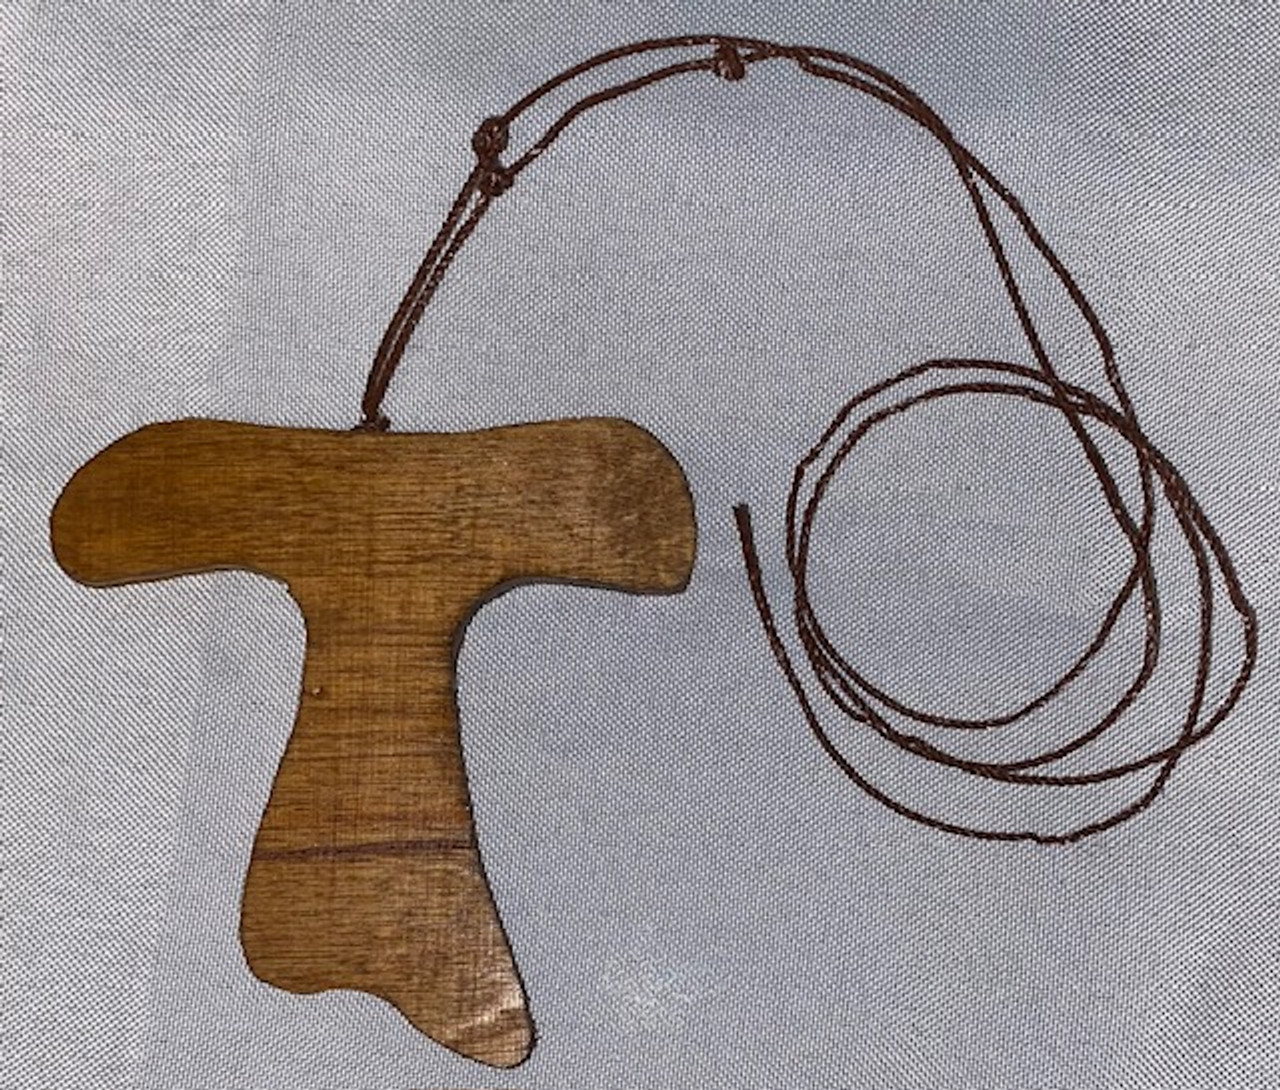 Handcrafted Wooded Tau Cross on cord - 3.5"